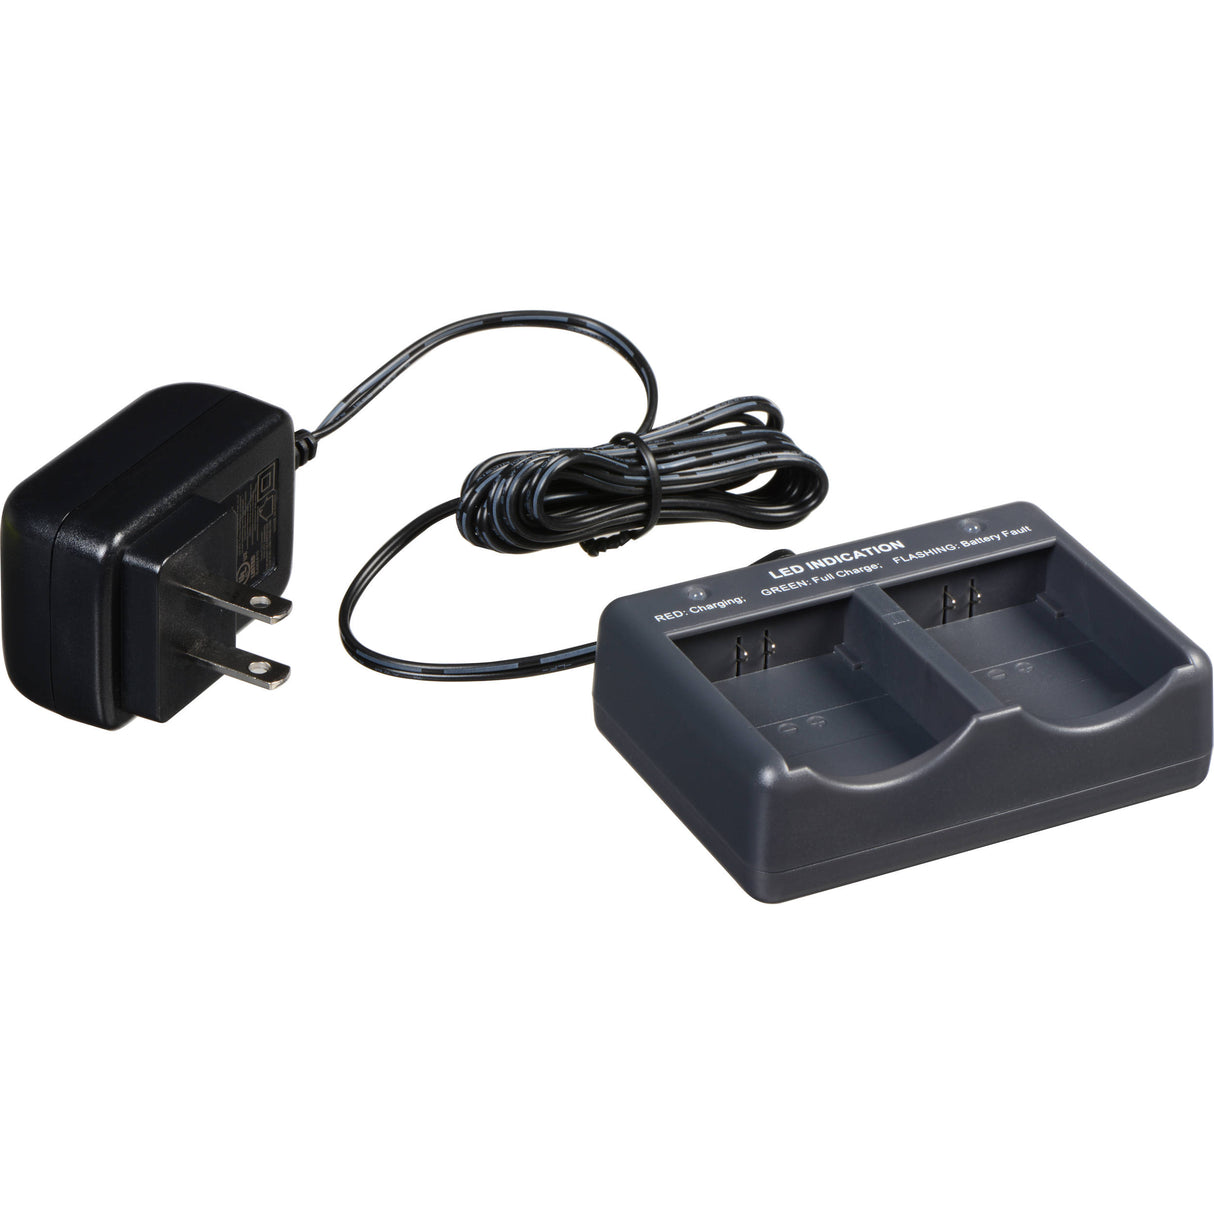 2 Port Charger - Charging base w/ AC Adapter